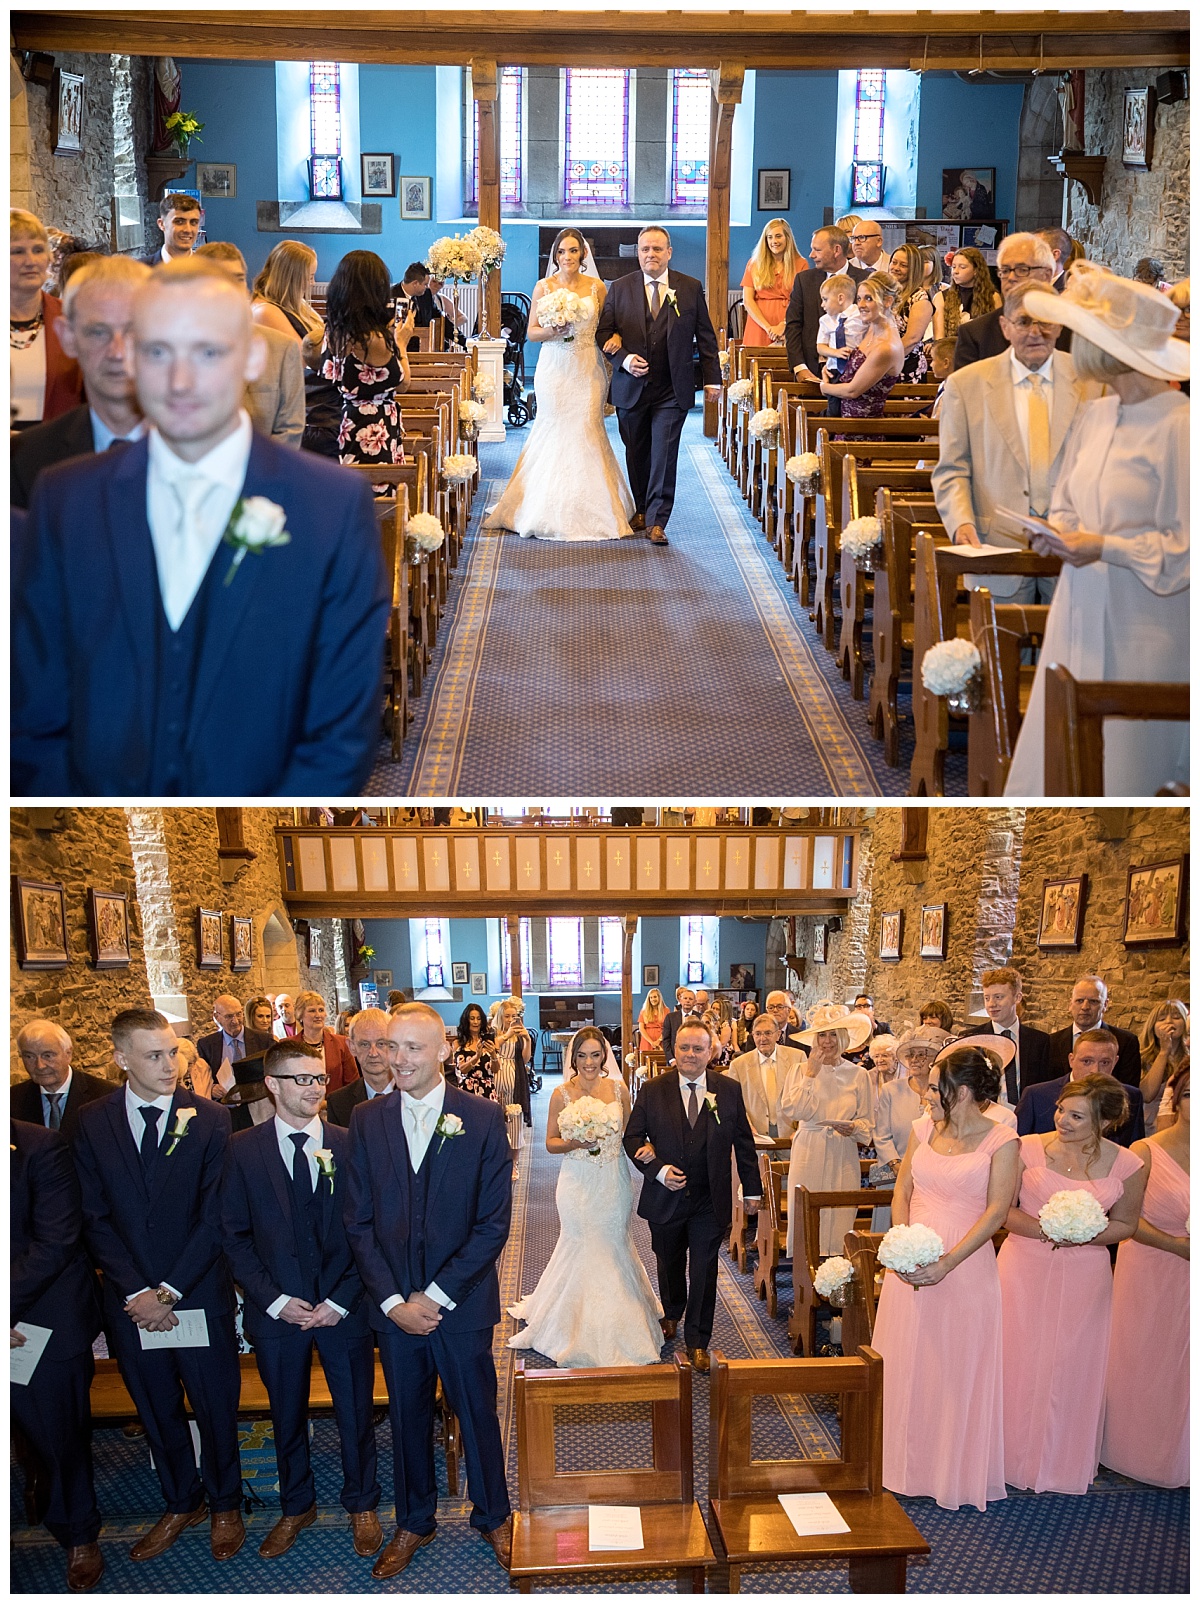 Wedding Photography Manchester - Victoria and Phillips Shireburn Arms wedding 28